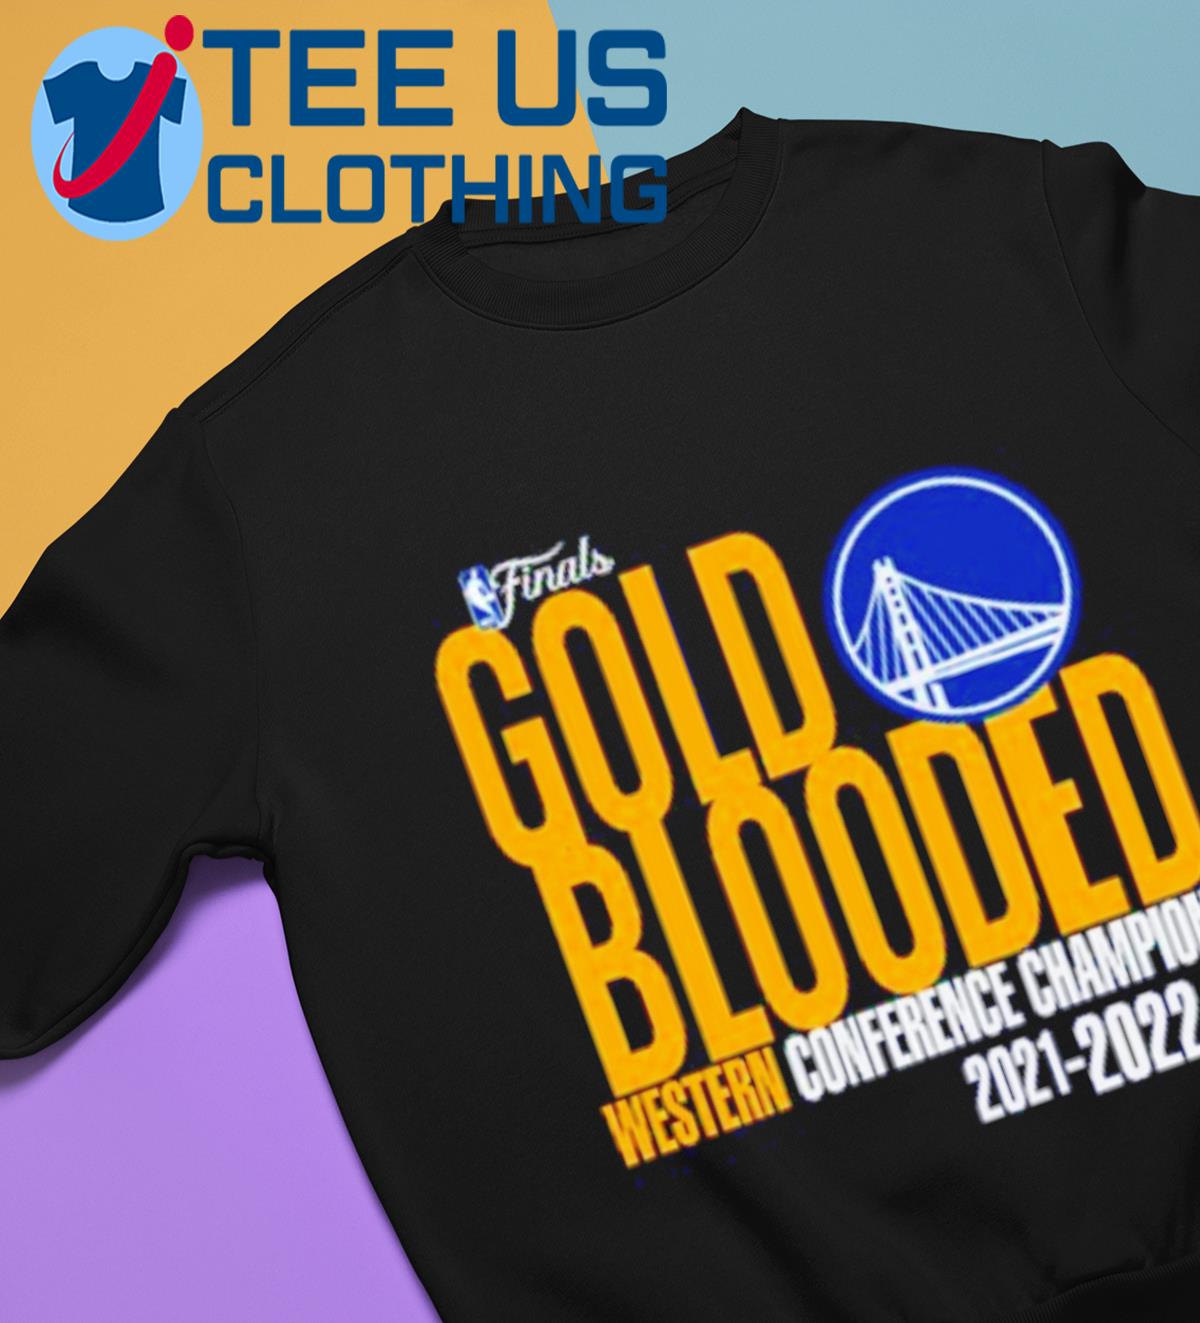 Golden State Warriors Finals 2021-2022 Gold Blooded Champions logo T-shirt,  hoodie, sweater, long sleeve and tank top